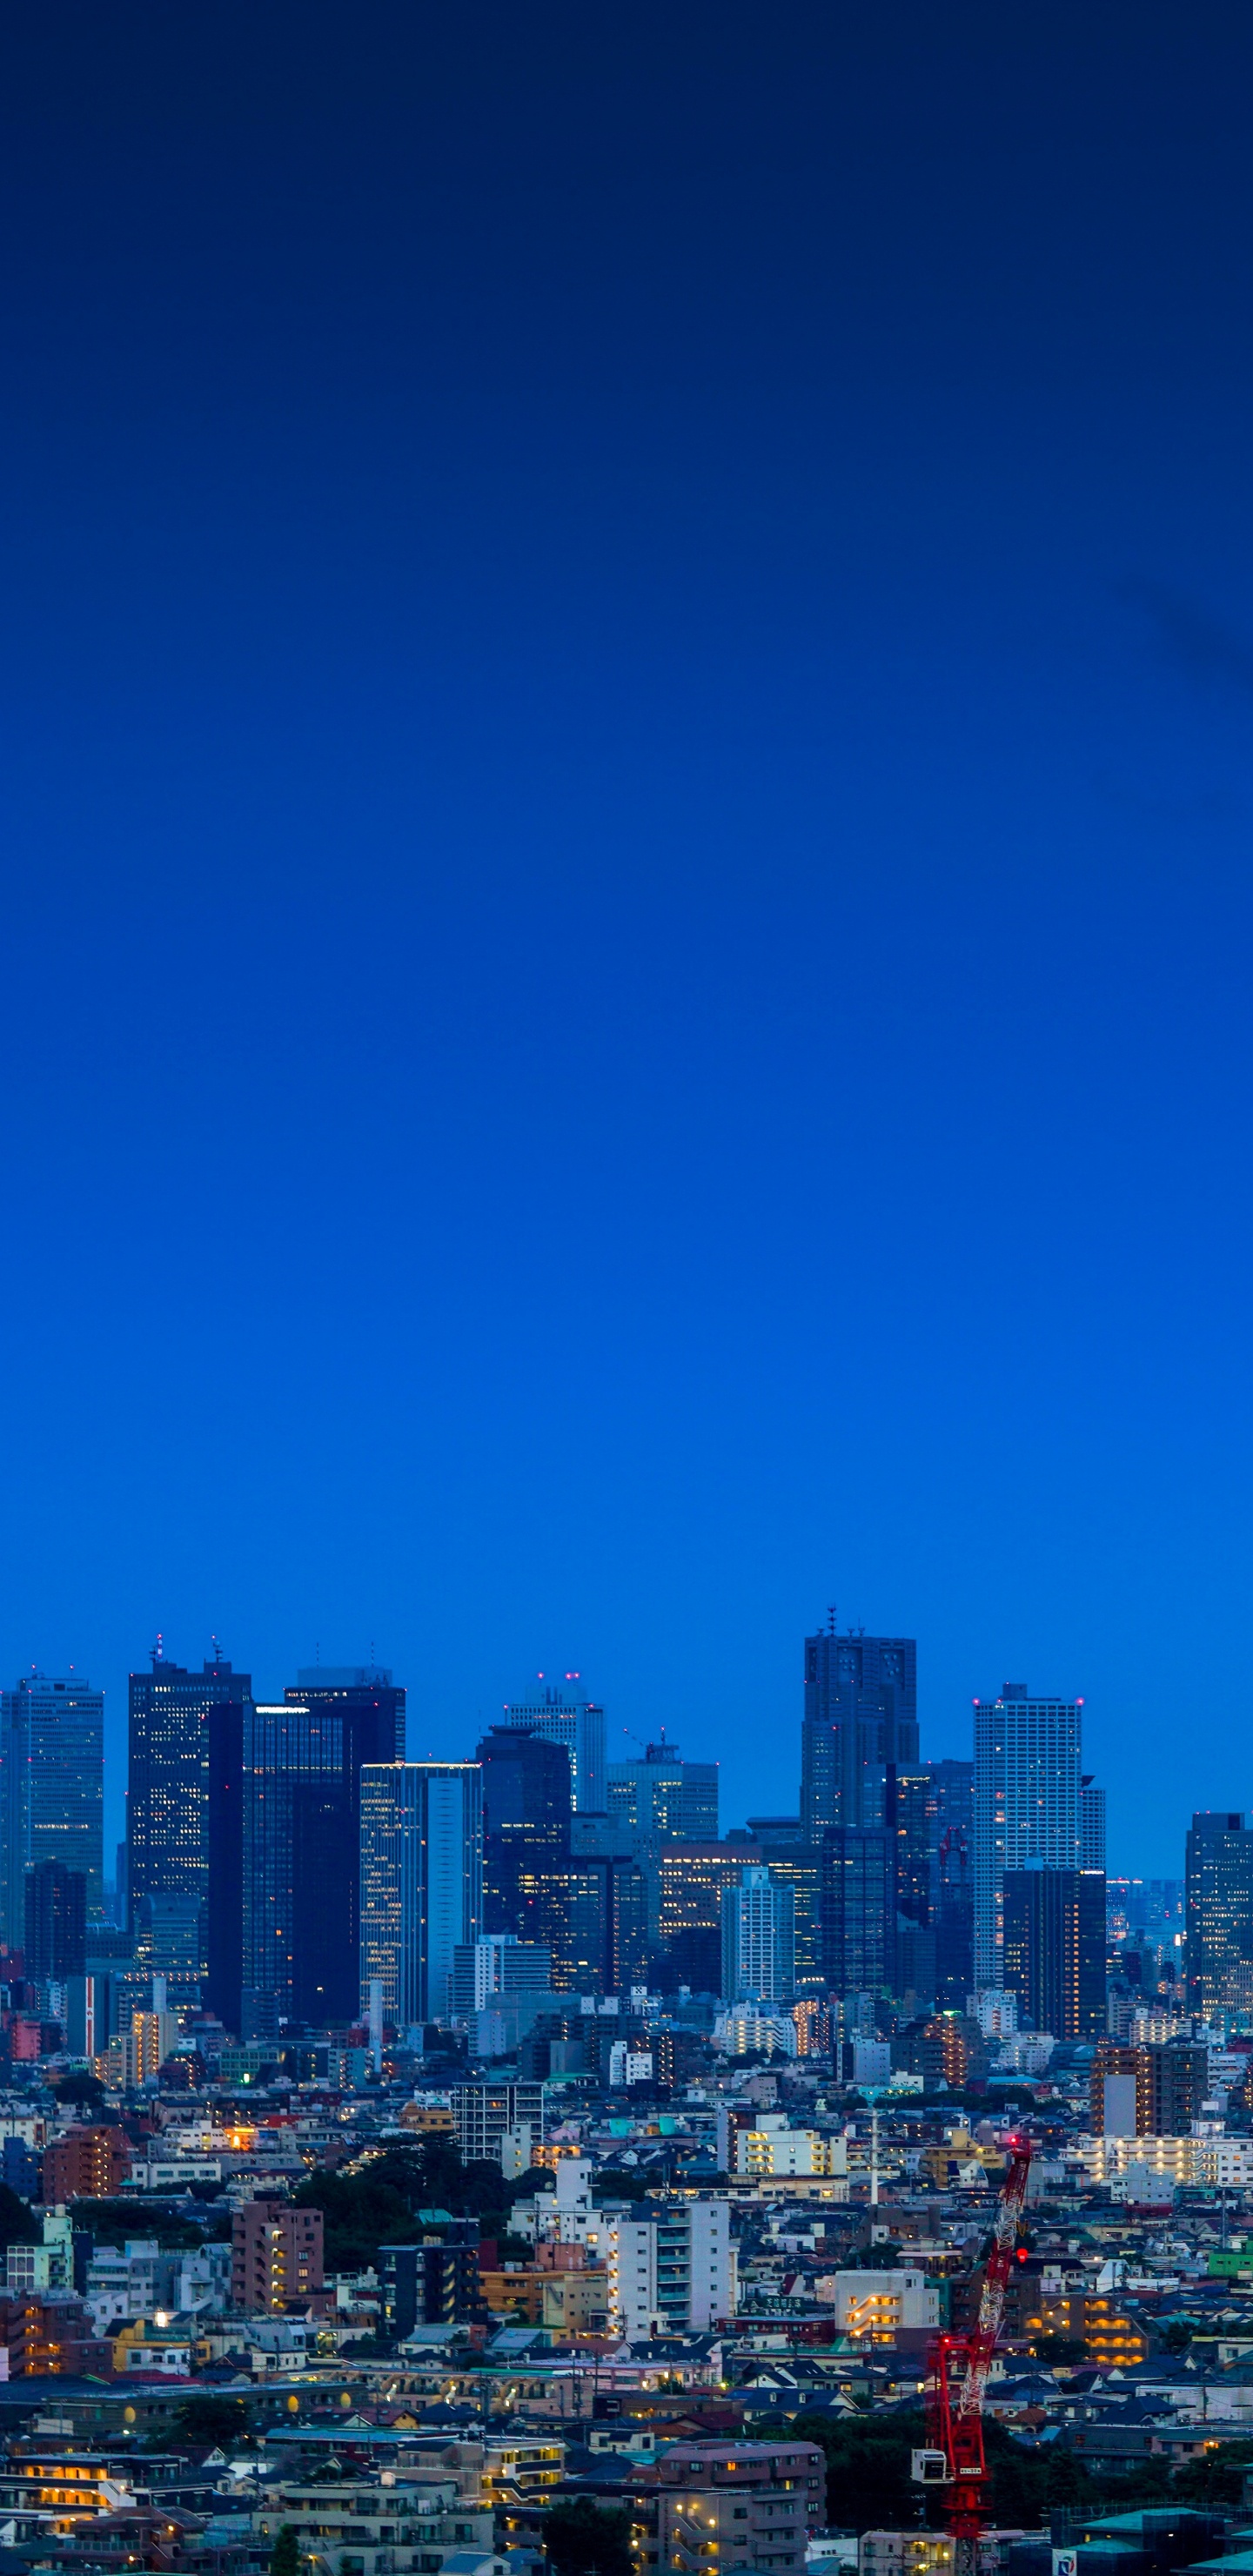 City With High Rise Buildings Under Blue Sky During Daytime. Wallpaper in 1440x2960 Resolution